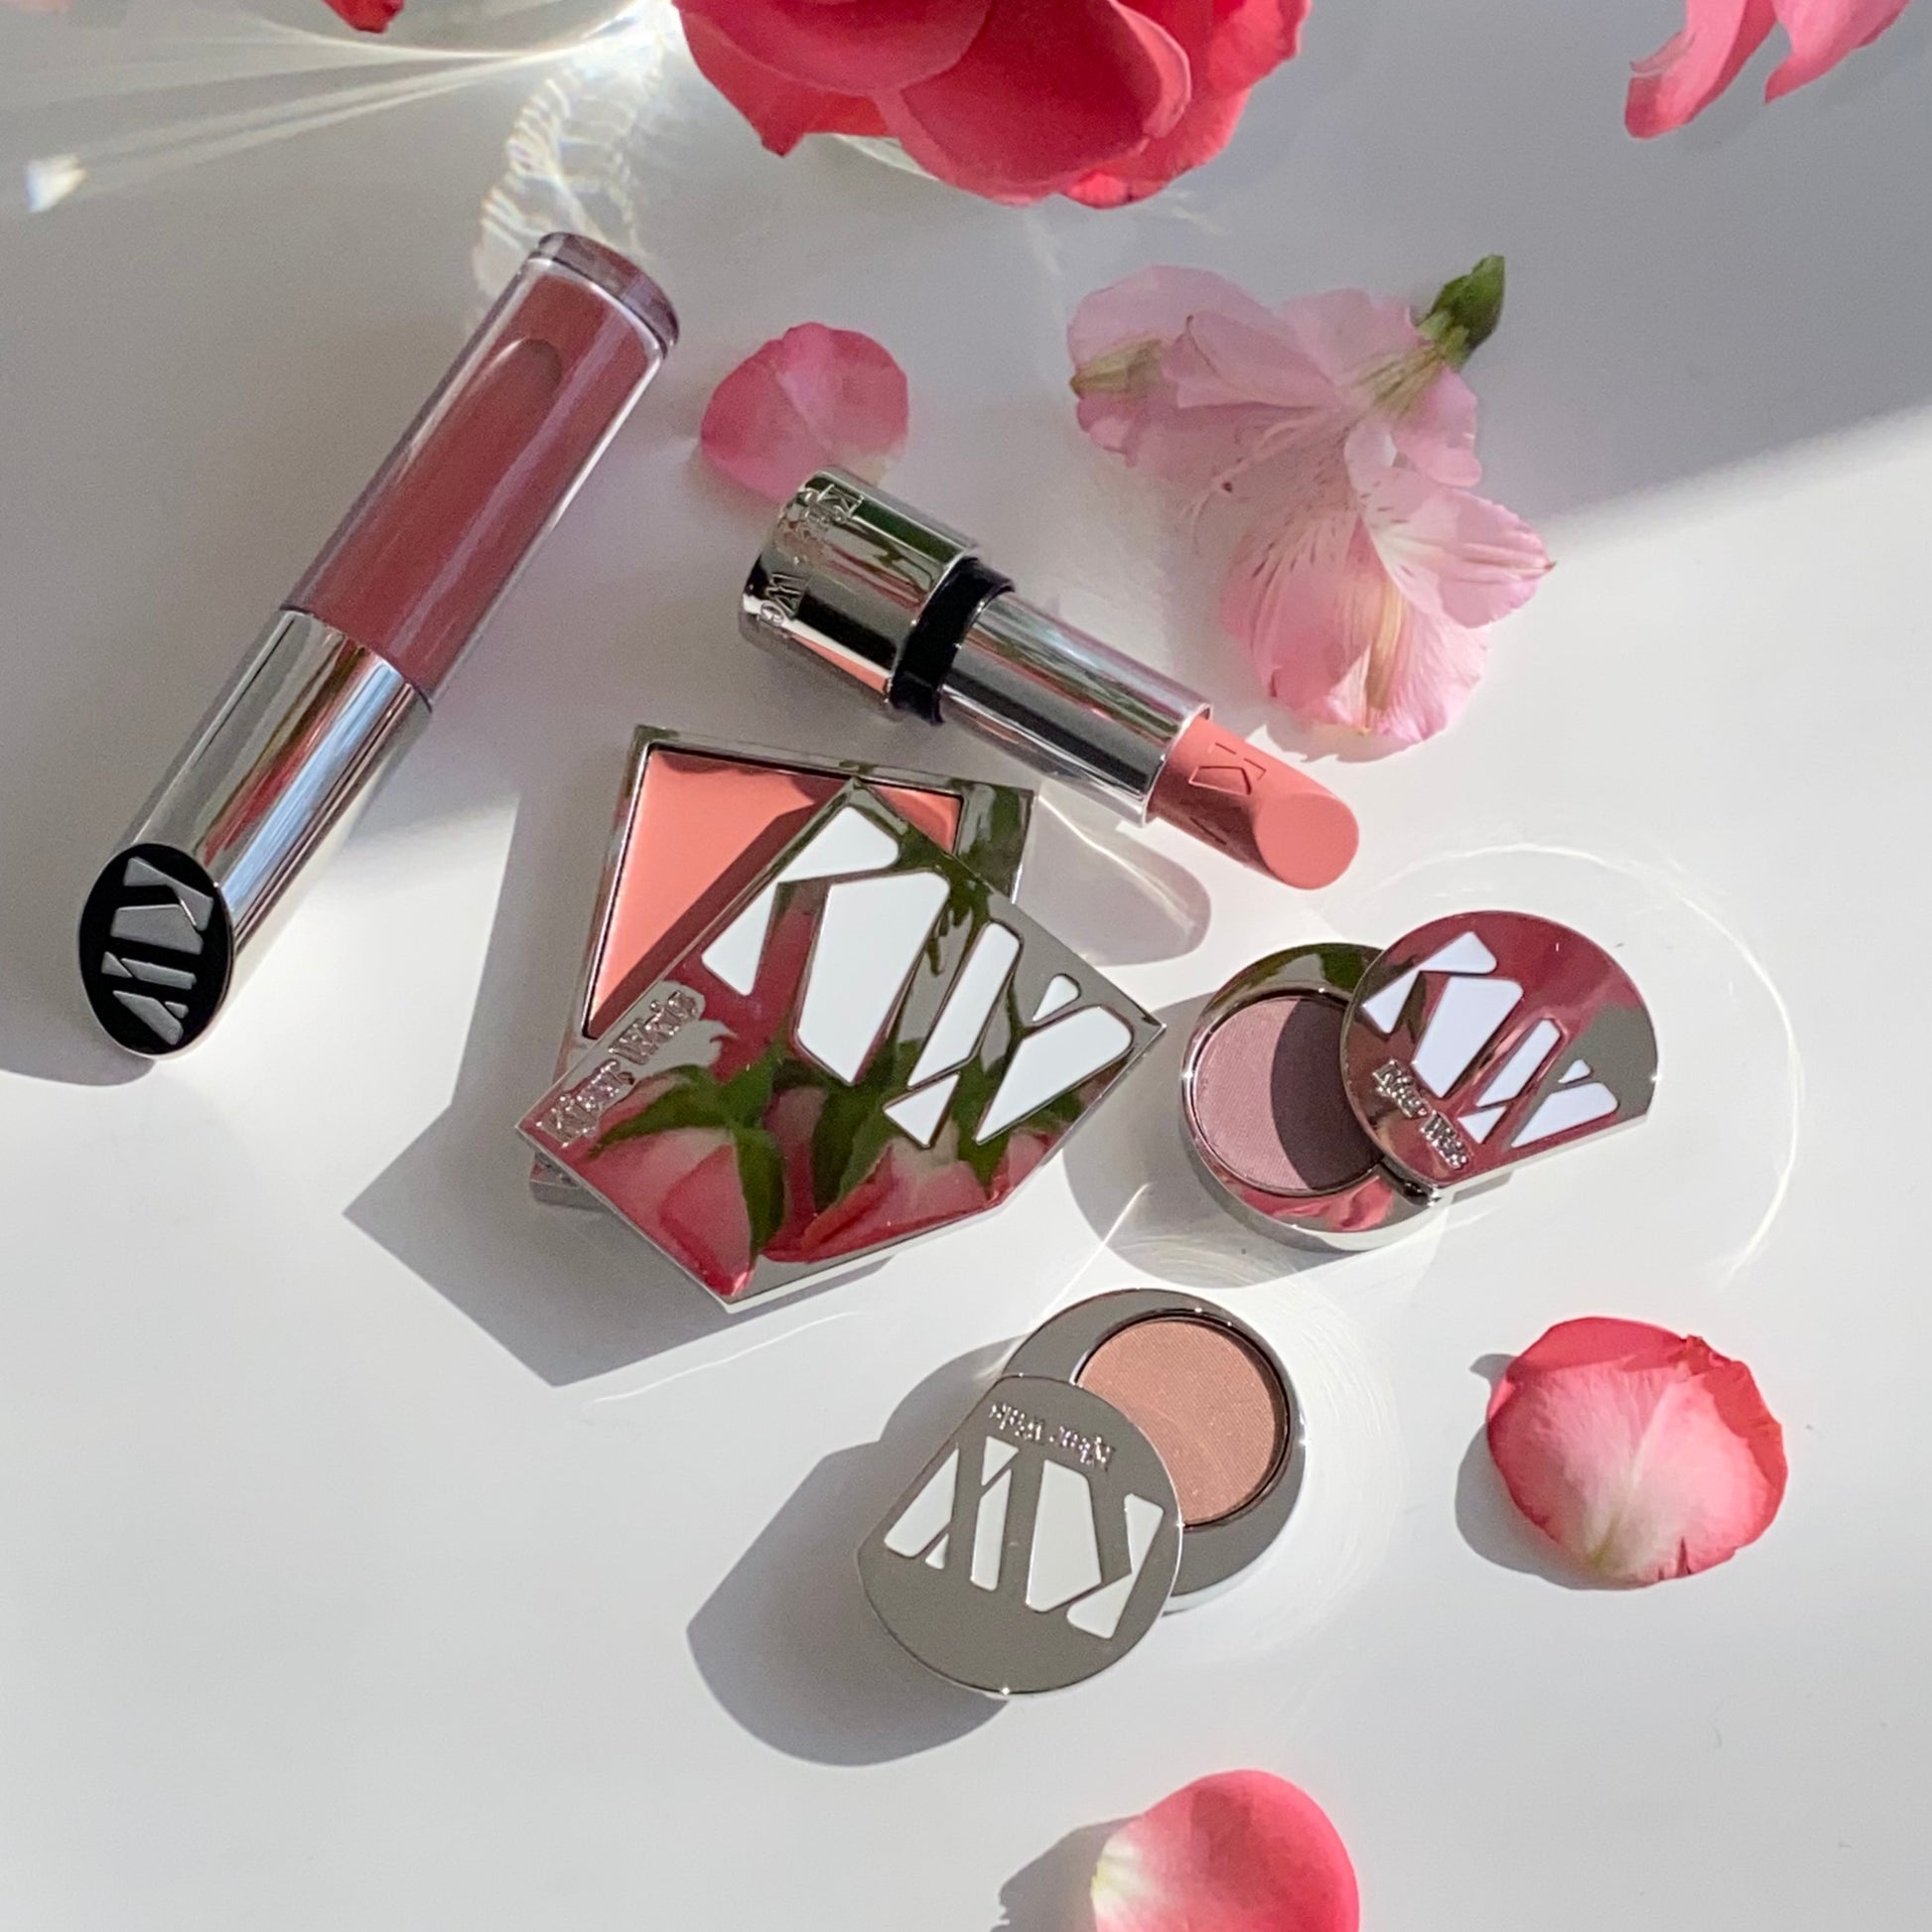 Two KW eye shadow palettes alongside KW lipstick, lip gloss, and cream glow, surrounded by pink flower petals 